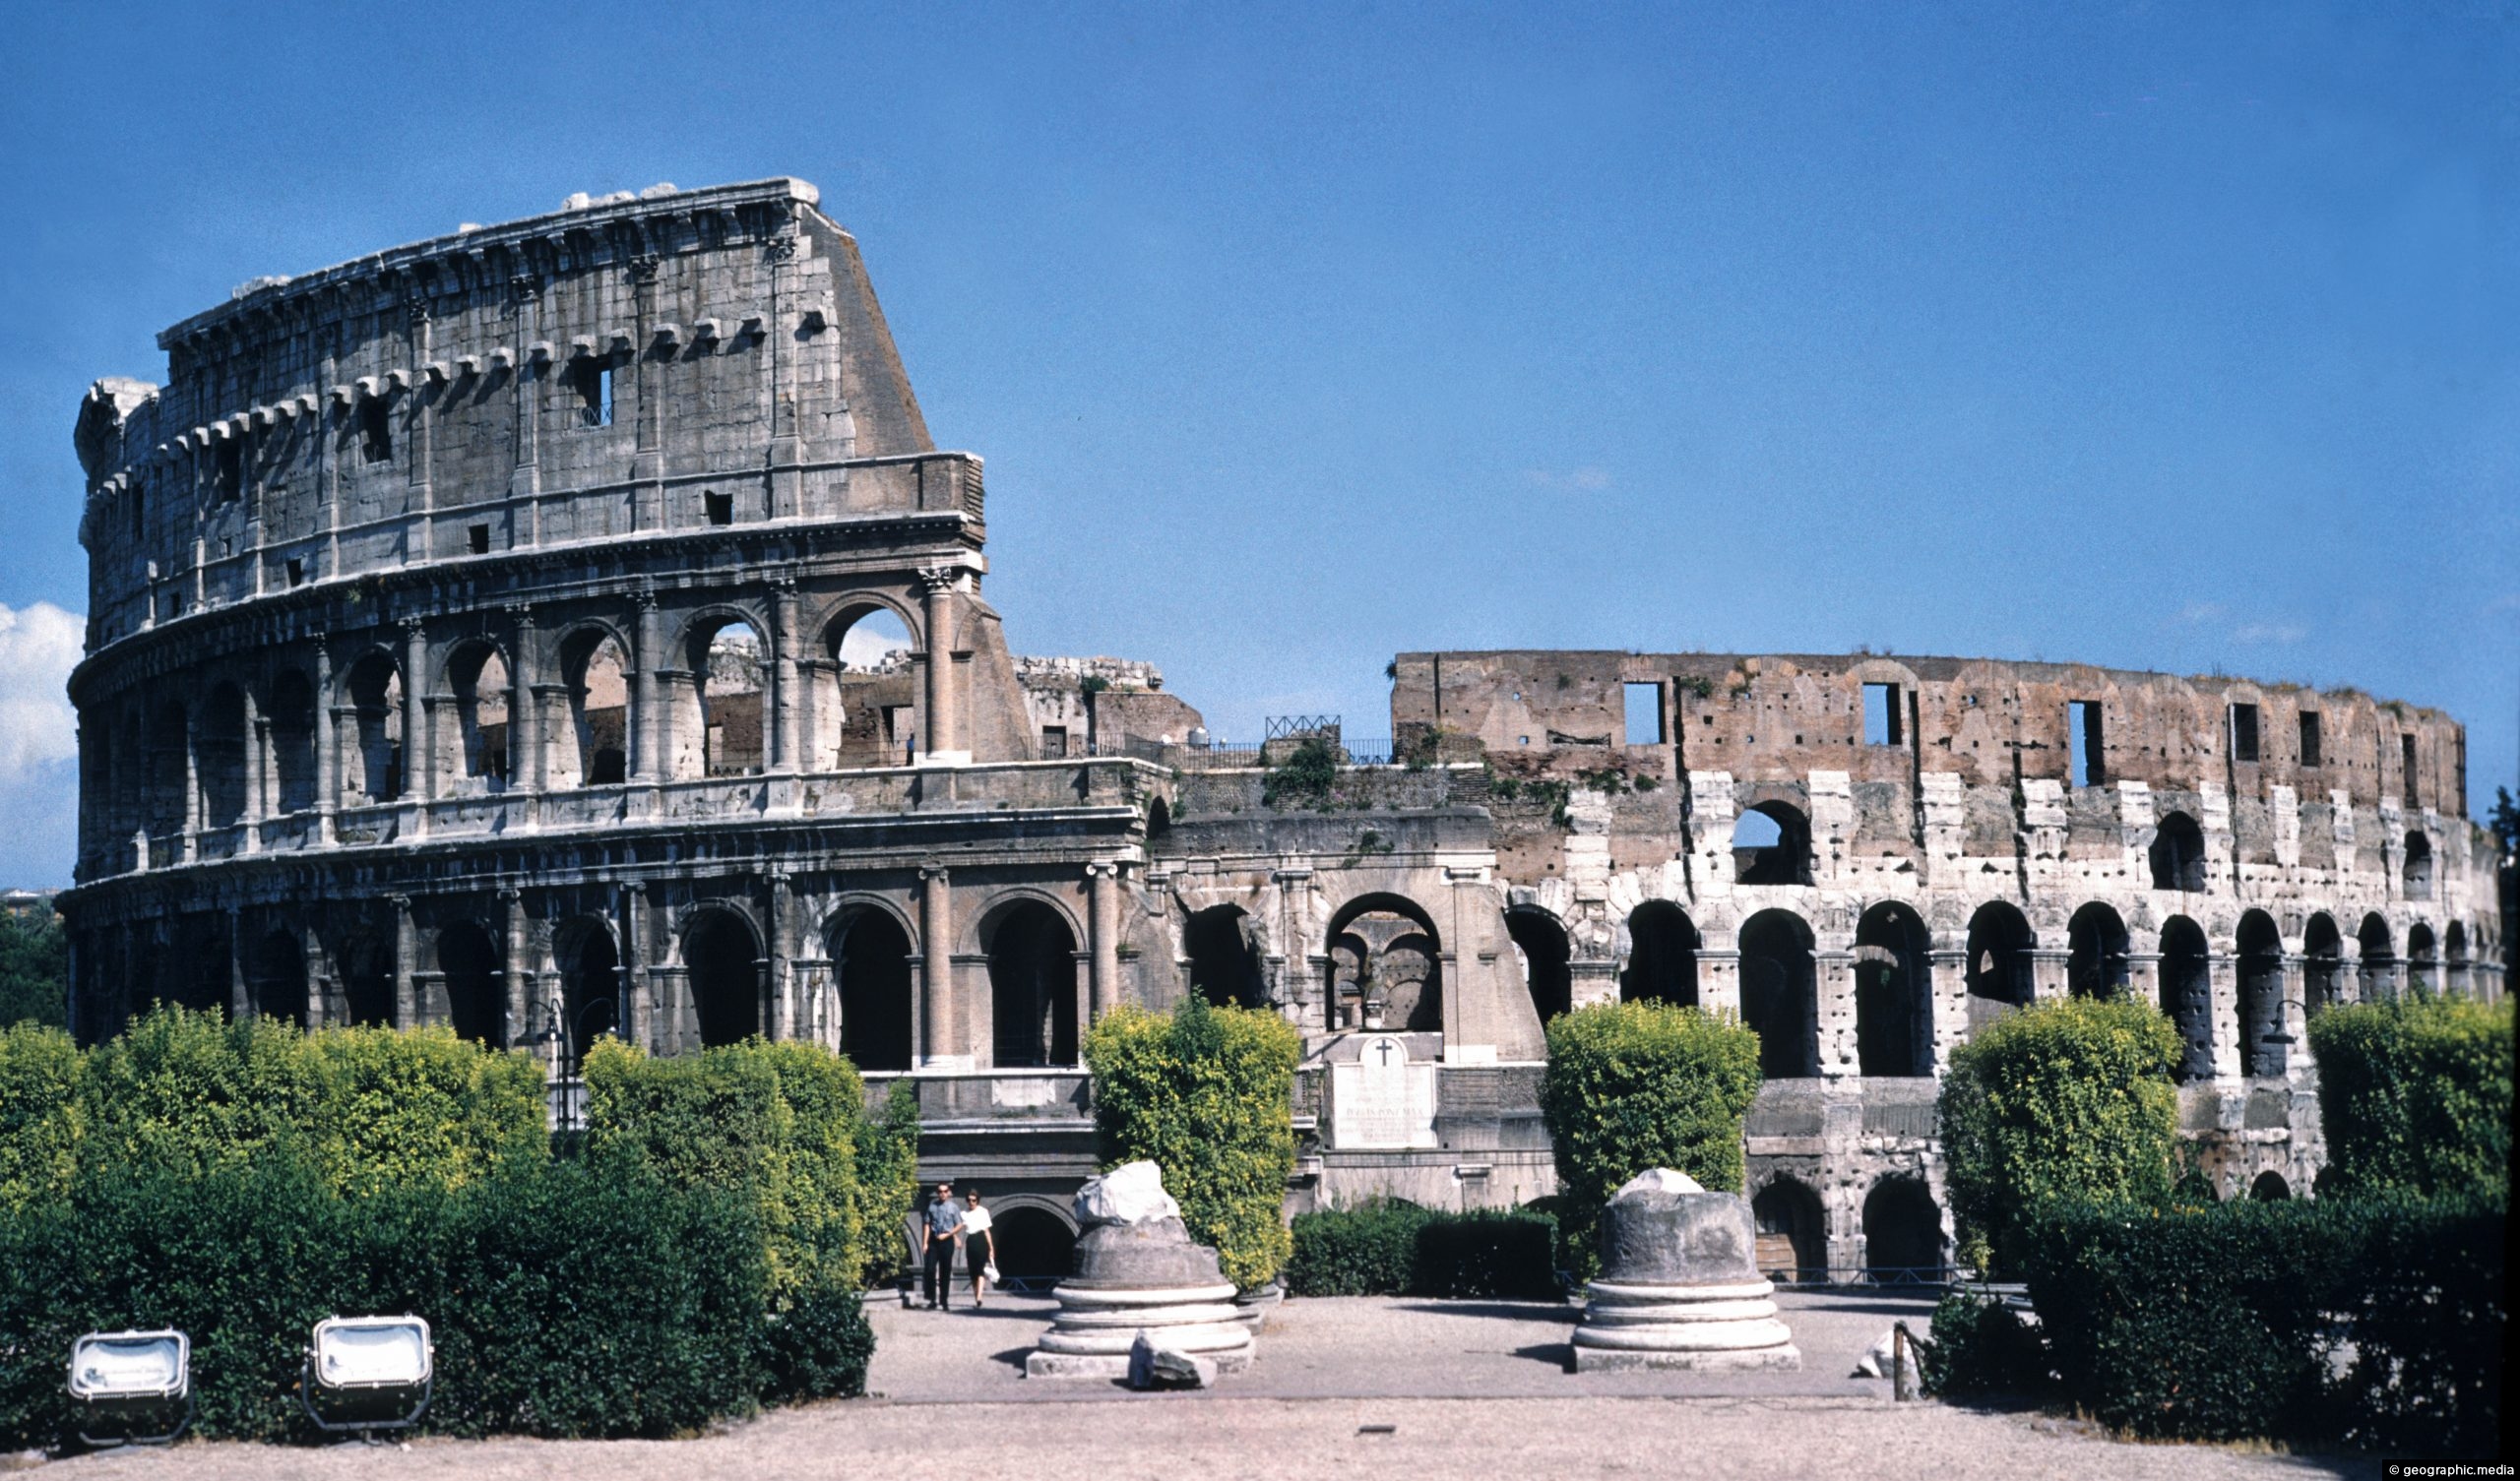 View of the Colosseum in Rome (circa 1963)